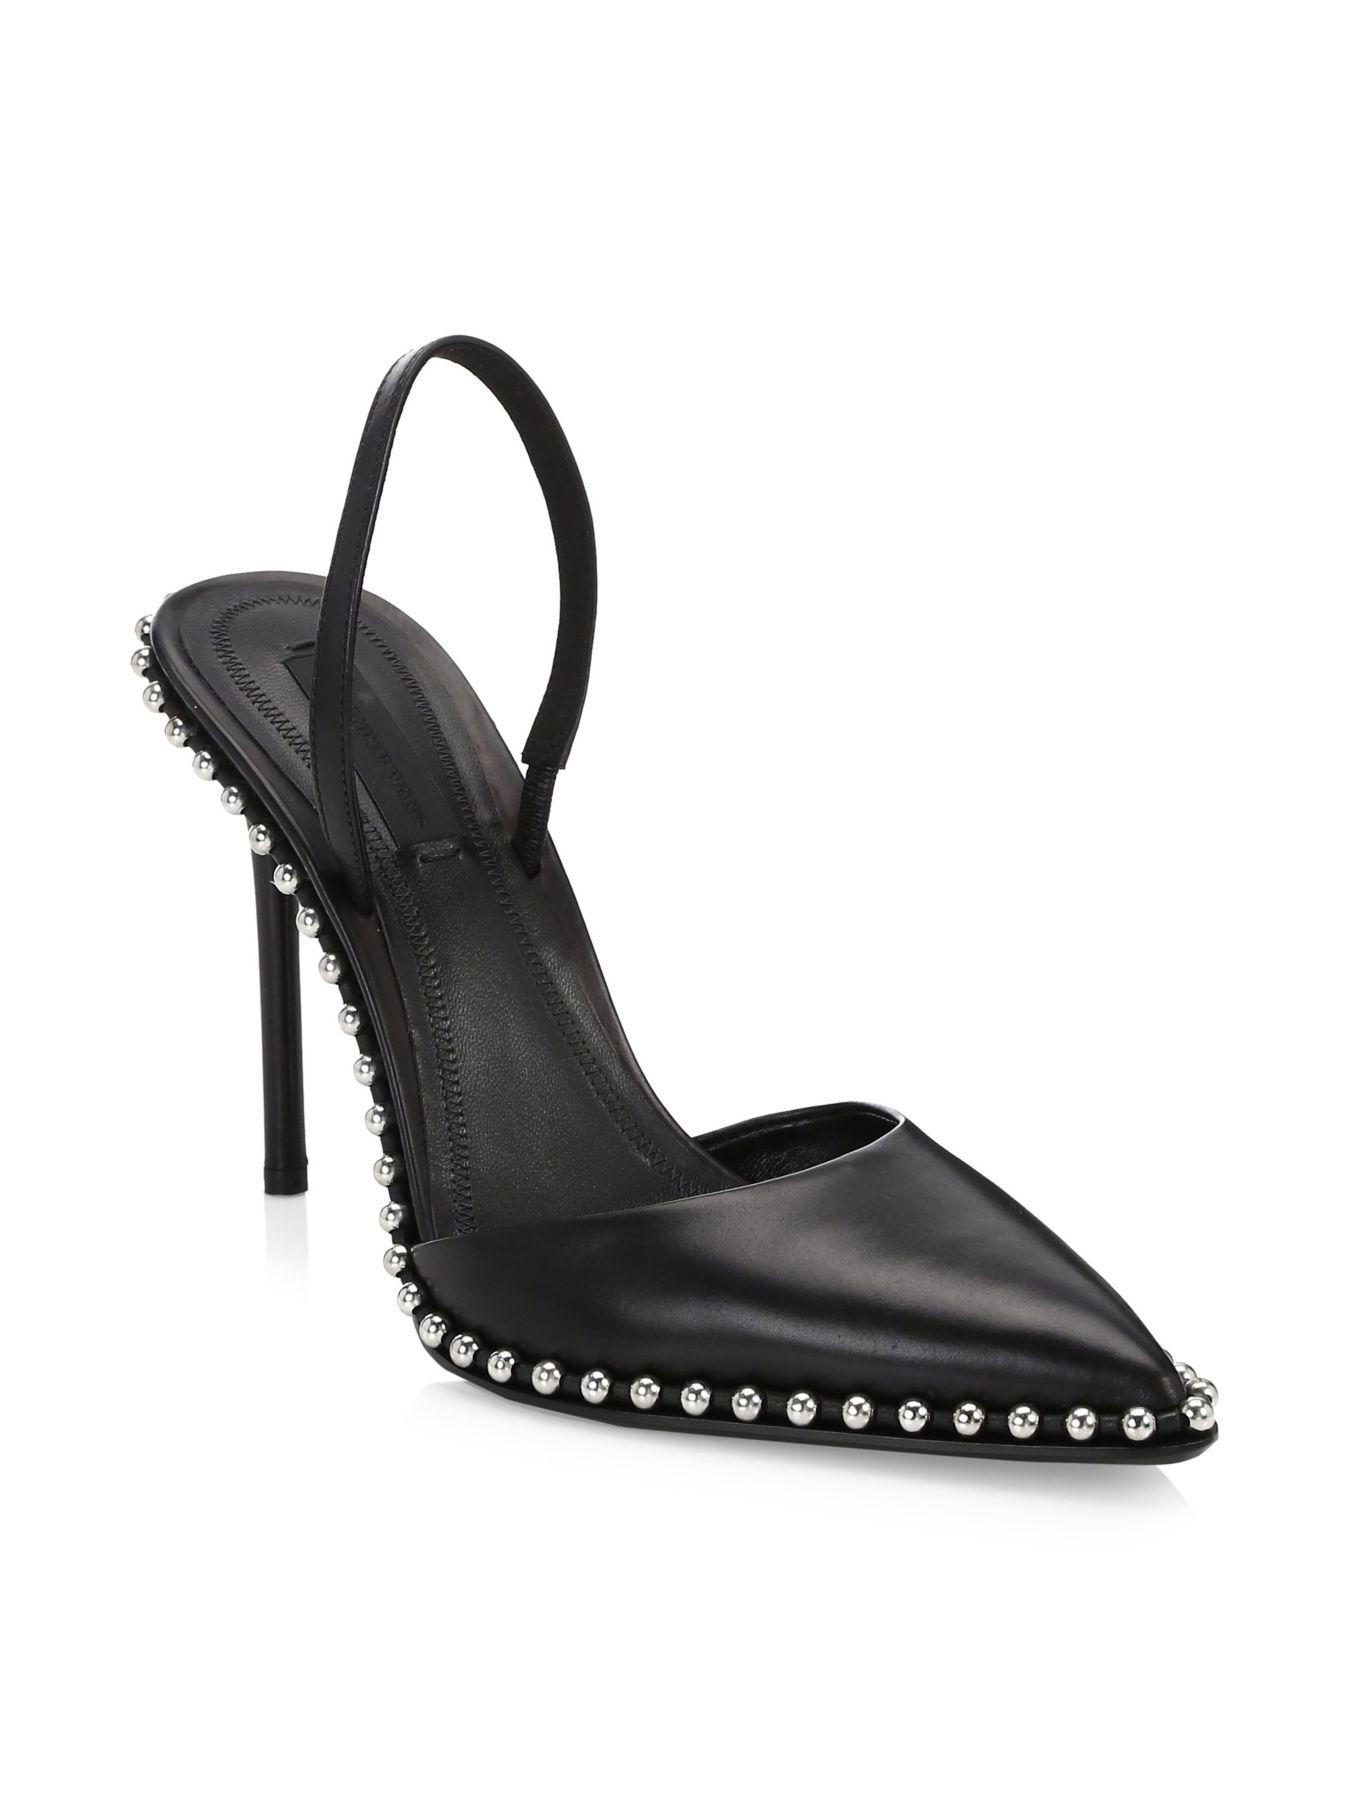 Alexander Wang Rina Studded Leather Slingback Pumps in Black - Lyst